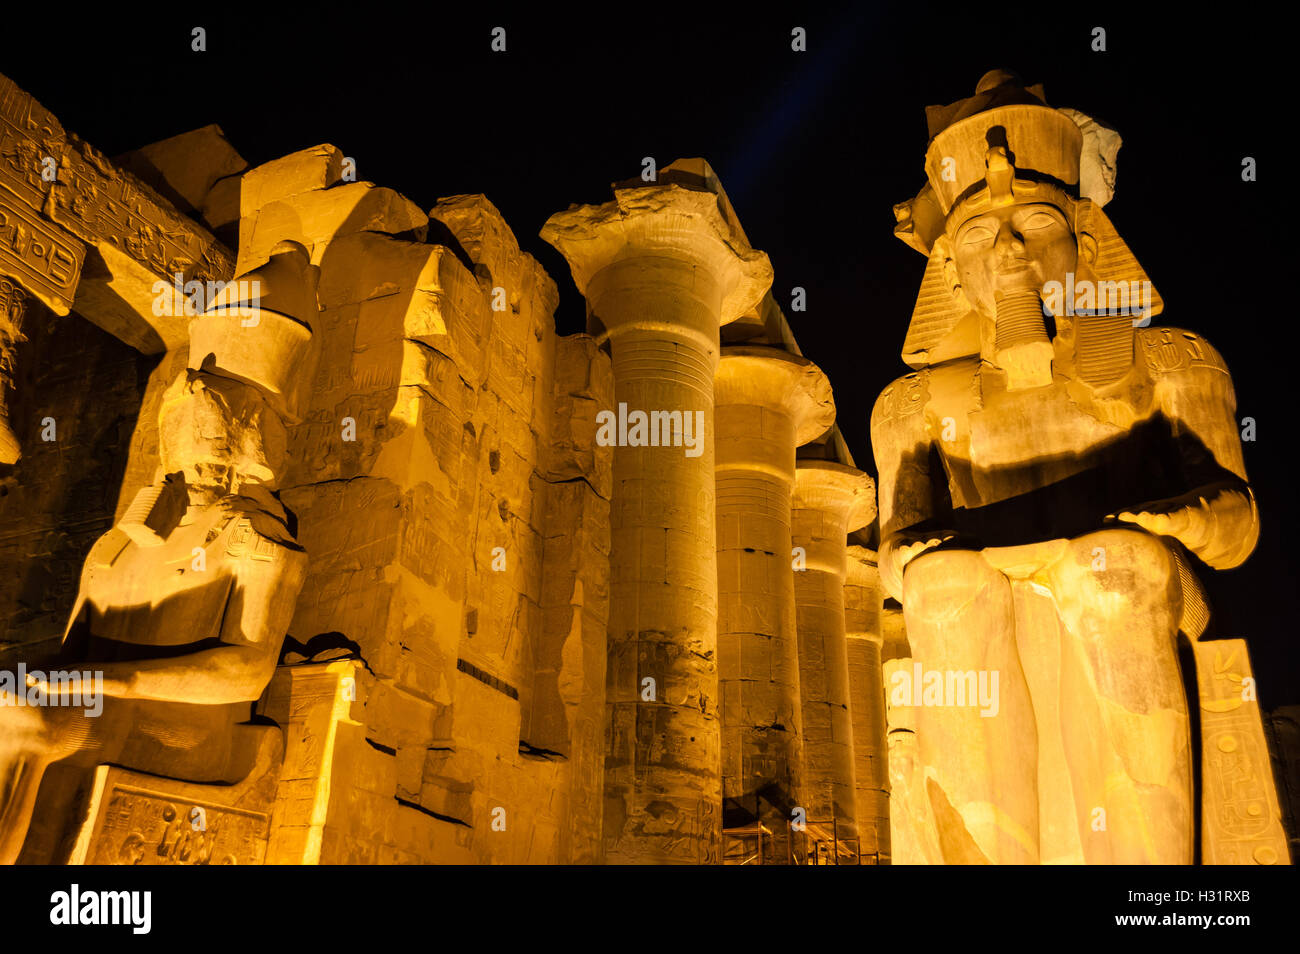 Egypt. Luxor Temple is a large temple complex founded in 1400 BC. Ramesses II statue. Stock Photo